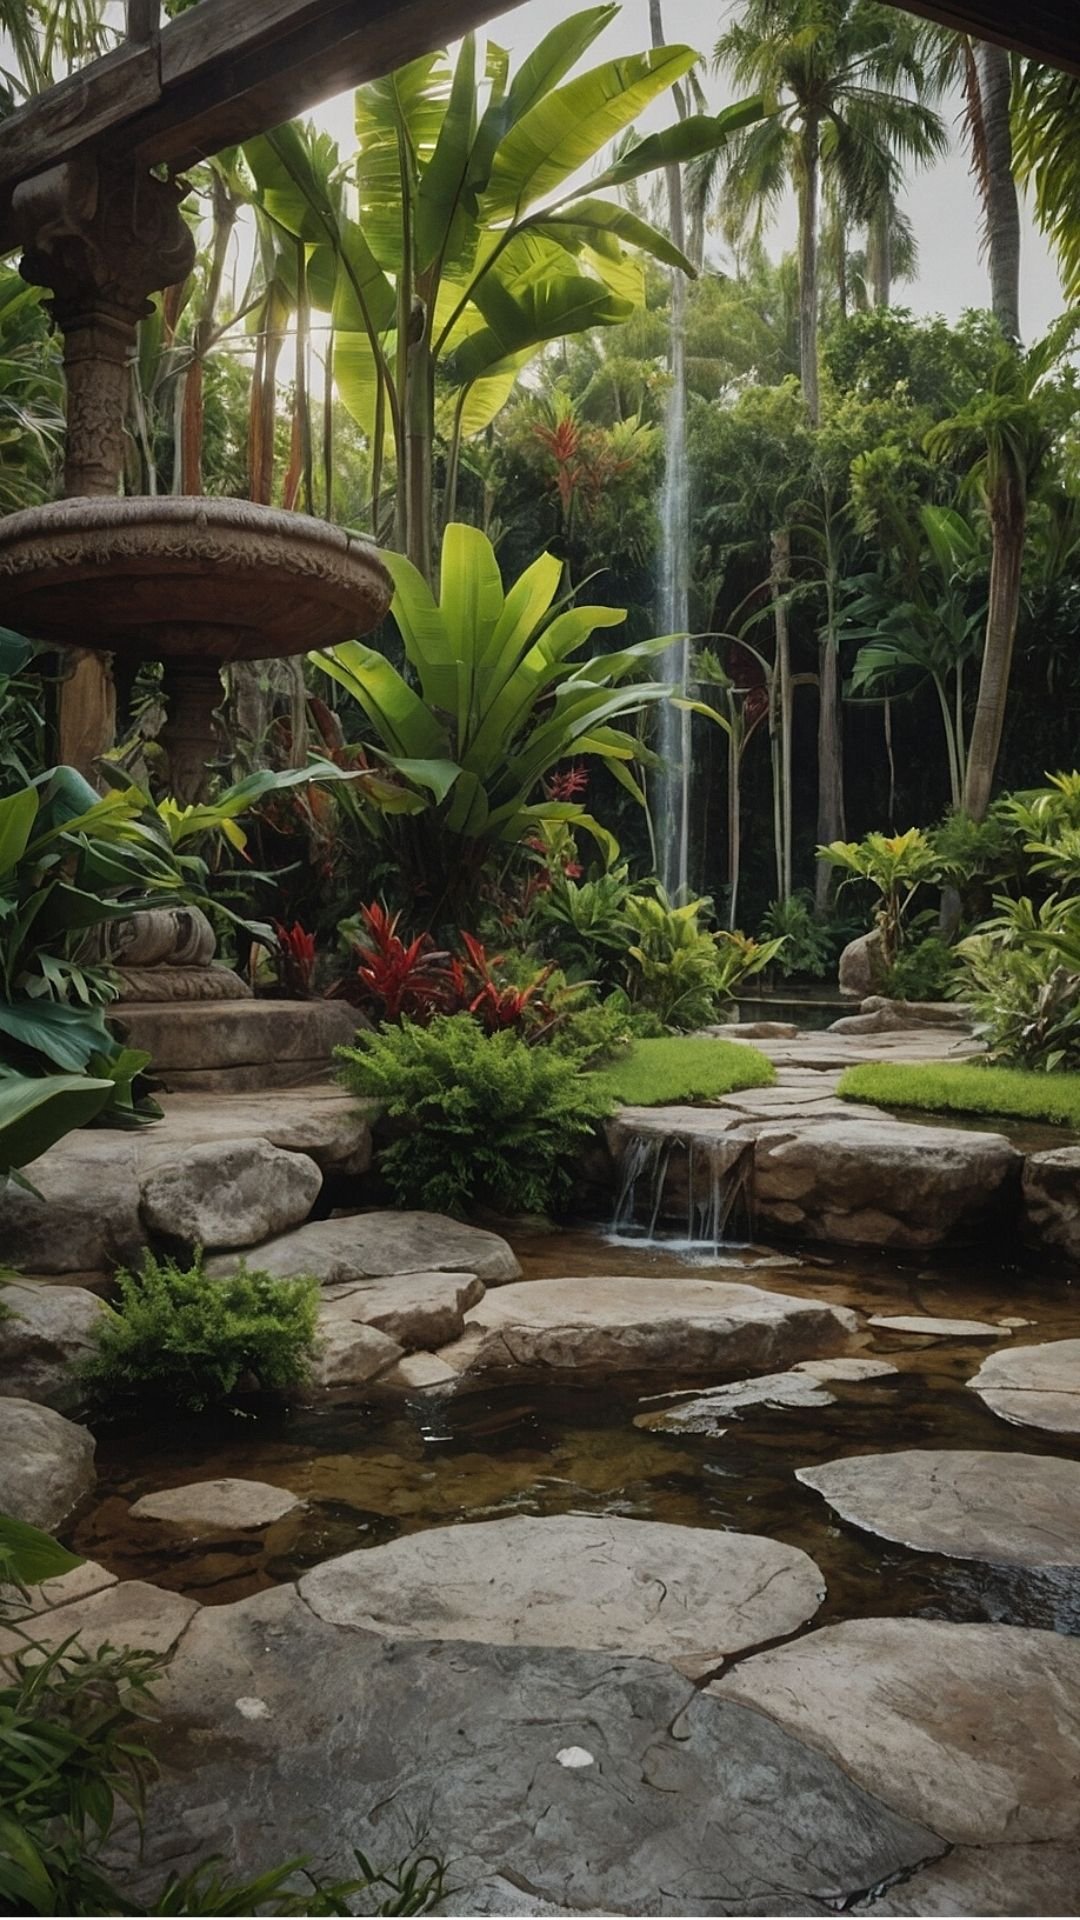 Serenity Falls: Tranquil Tropical Garden with Water Feature